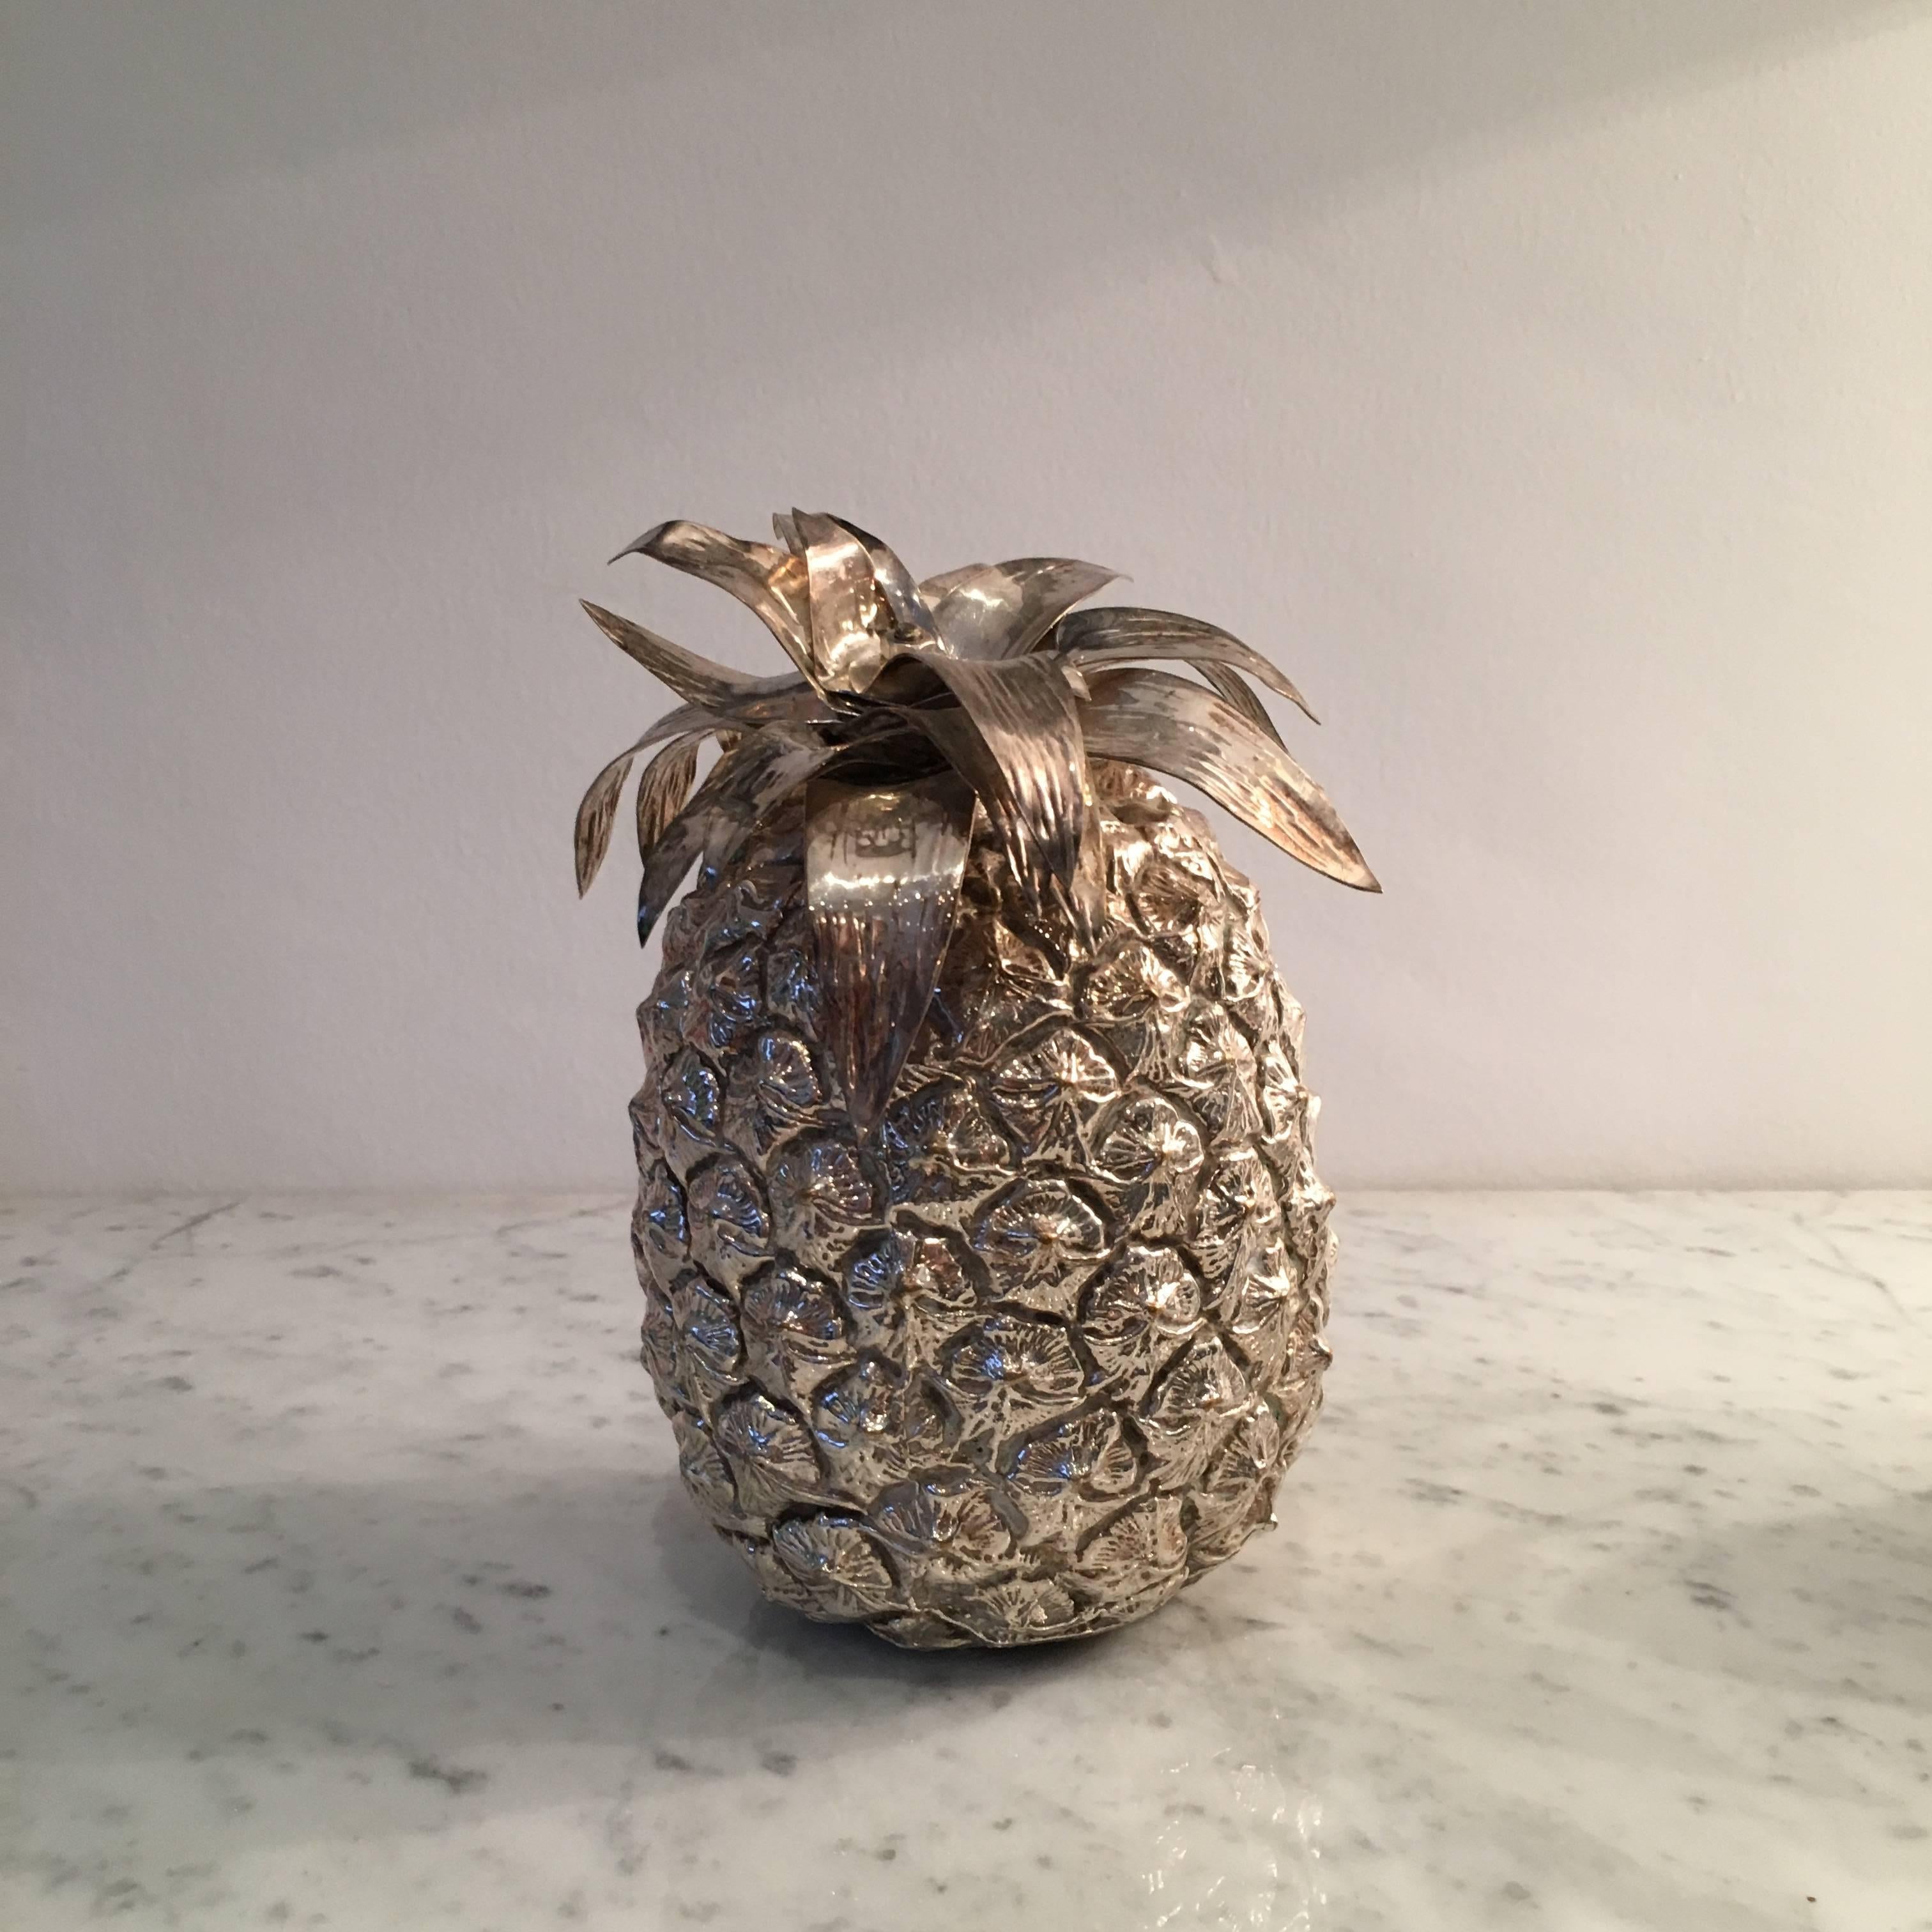 Beautiful decorative pair of pineapple in silvered metal.
Manufactured by Mauro Manetti, circa 1960.